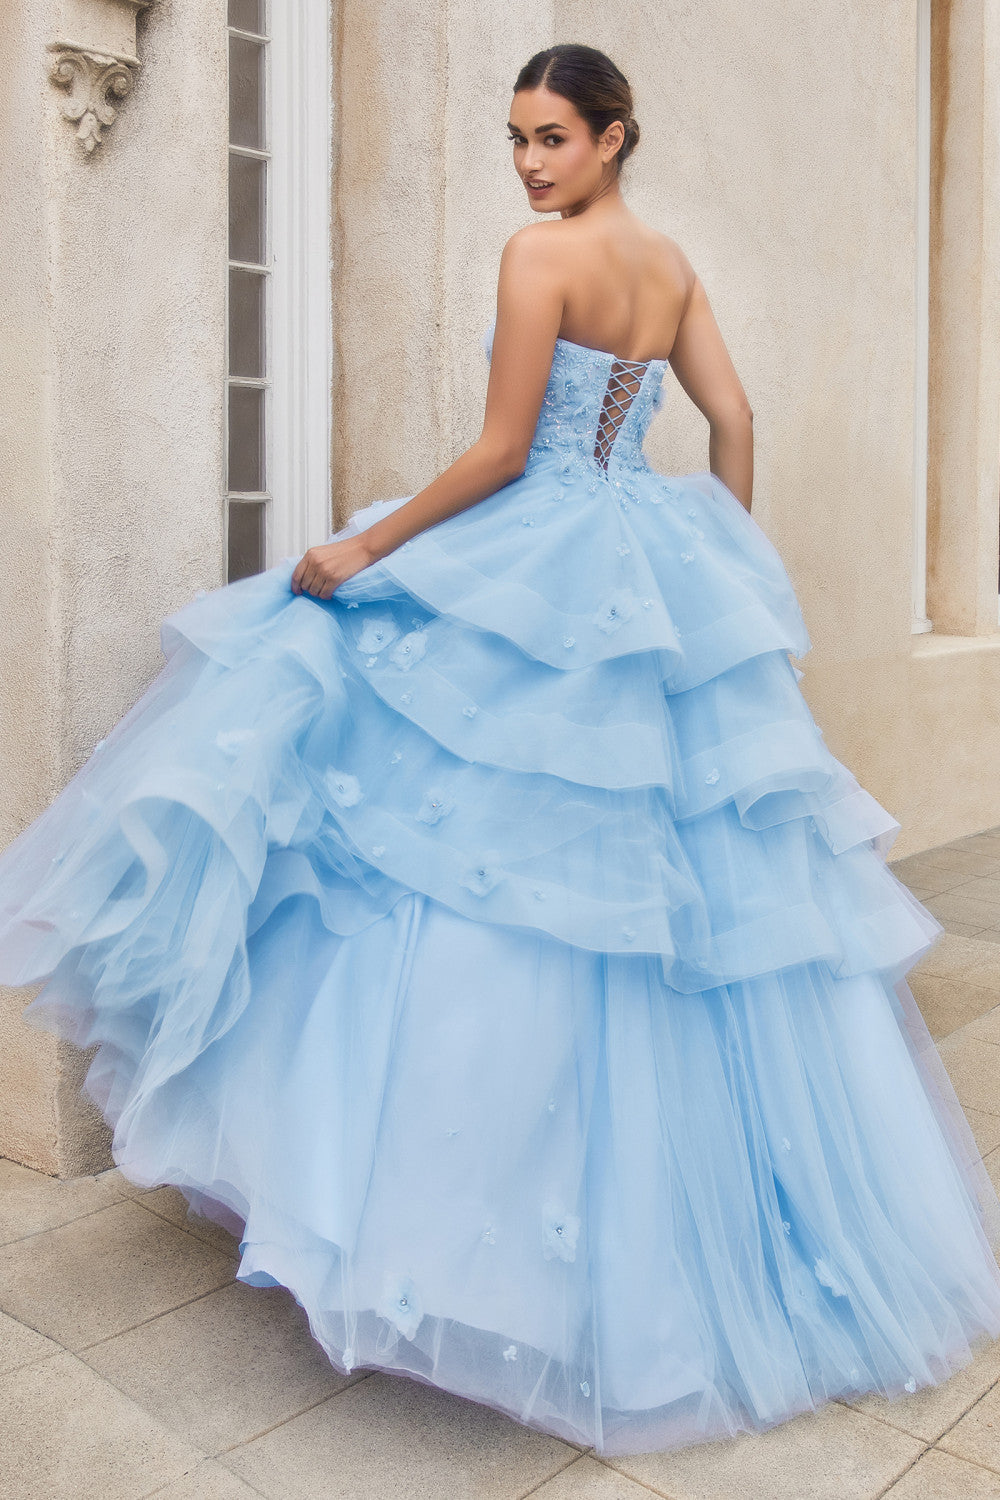 PEONY PETAL COUTURE LAYERED BALL GOWN ALA1220 Elsy Style All dresses